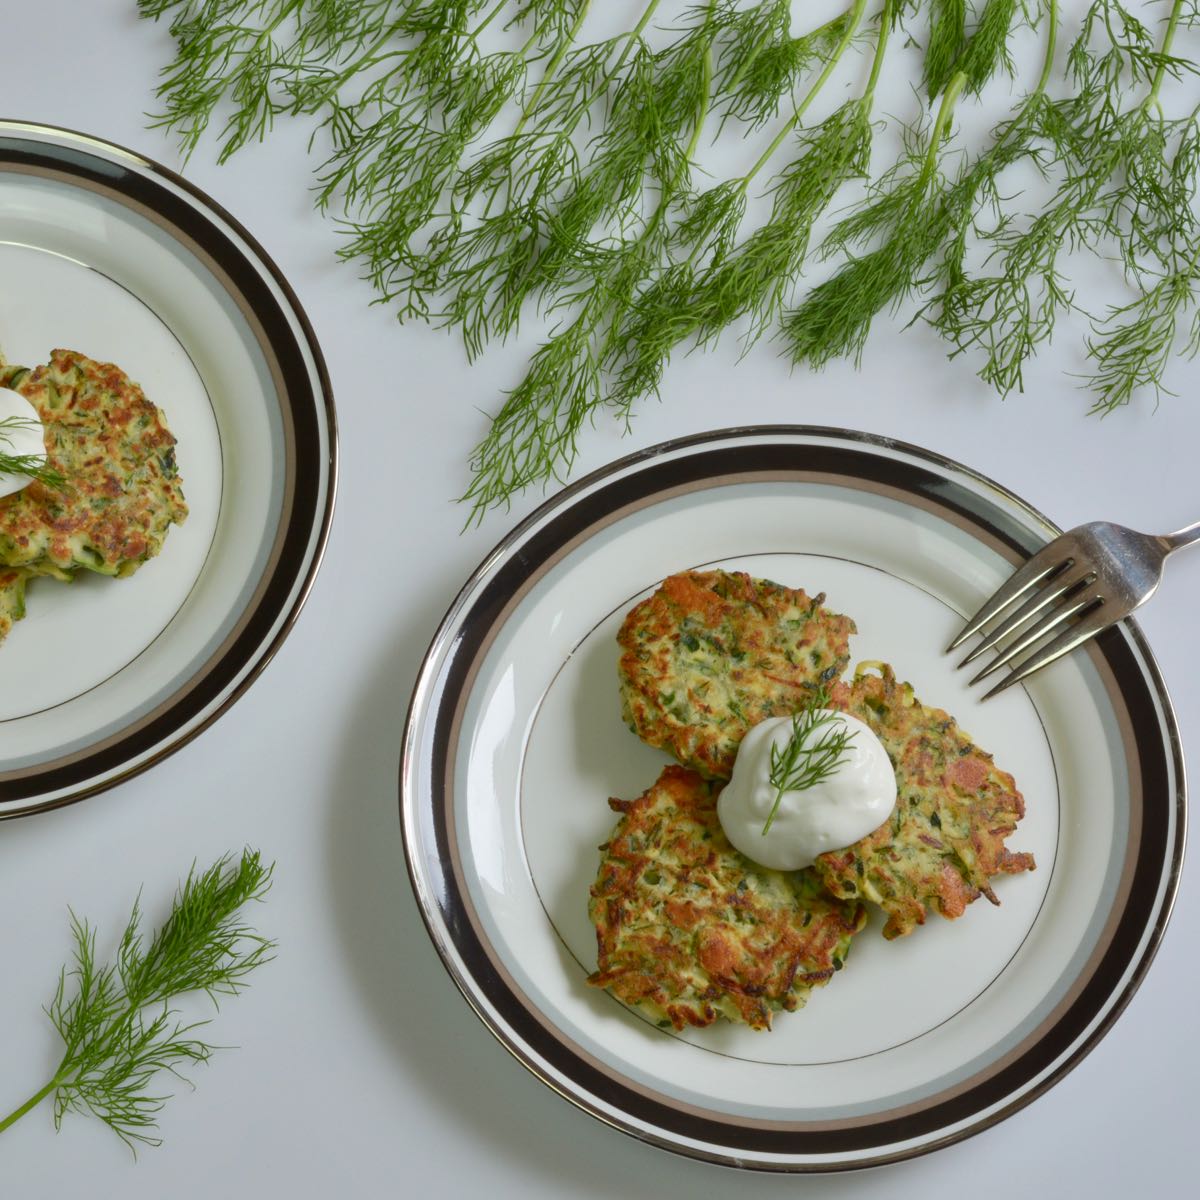 Two plates serving up Pan Fried Zucchini Fritters topped with sour cream and garnished with dill.